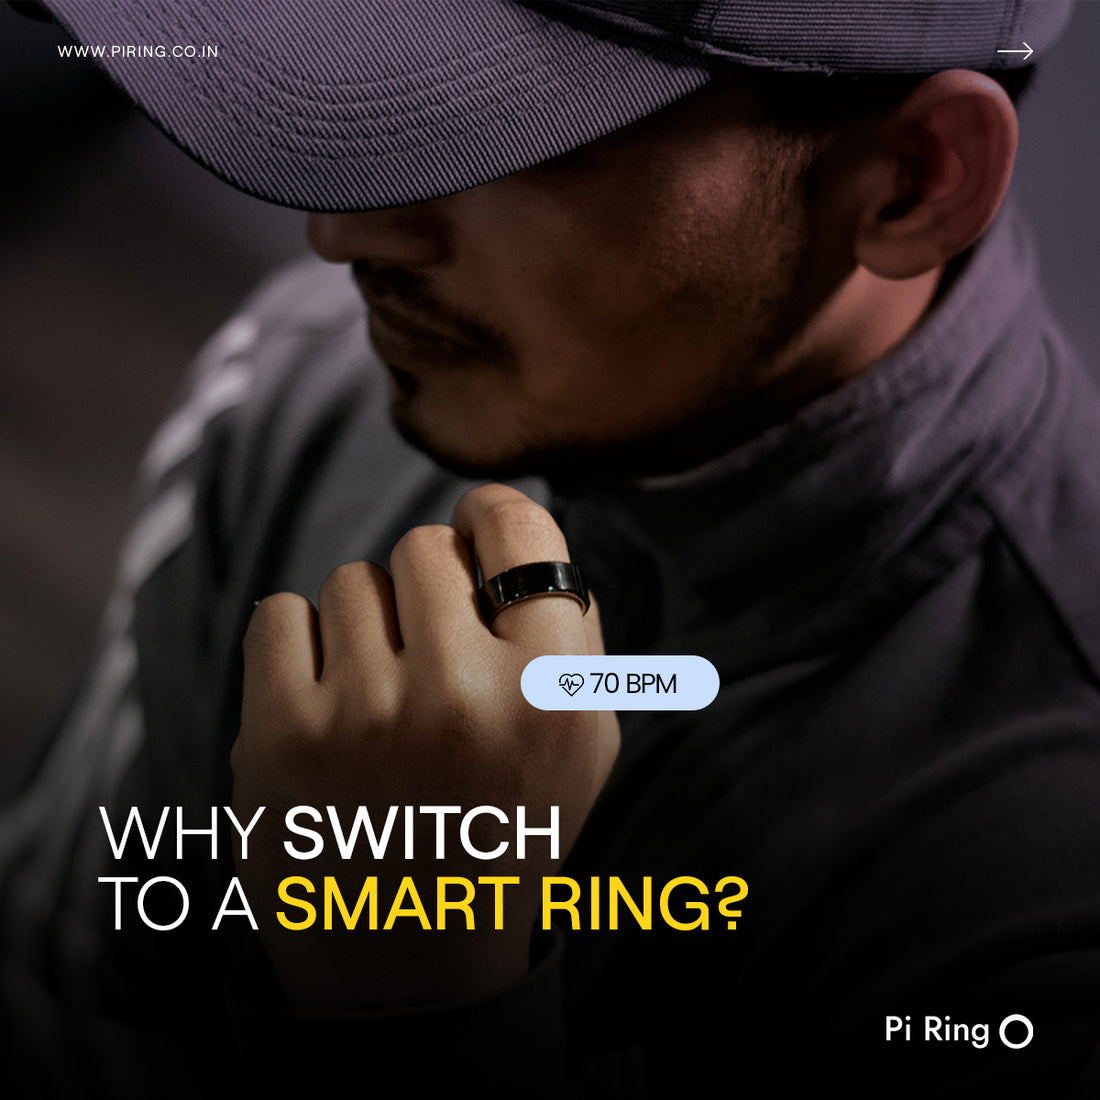 Smart Rings vs. Fitness Bands: Why Pi Ring Pro Comes Out on Top?